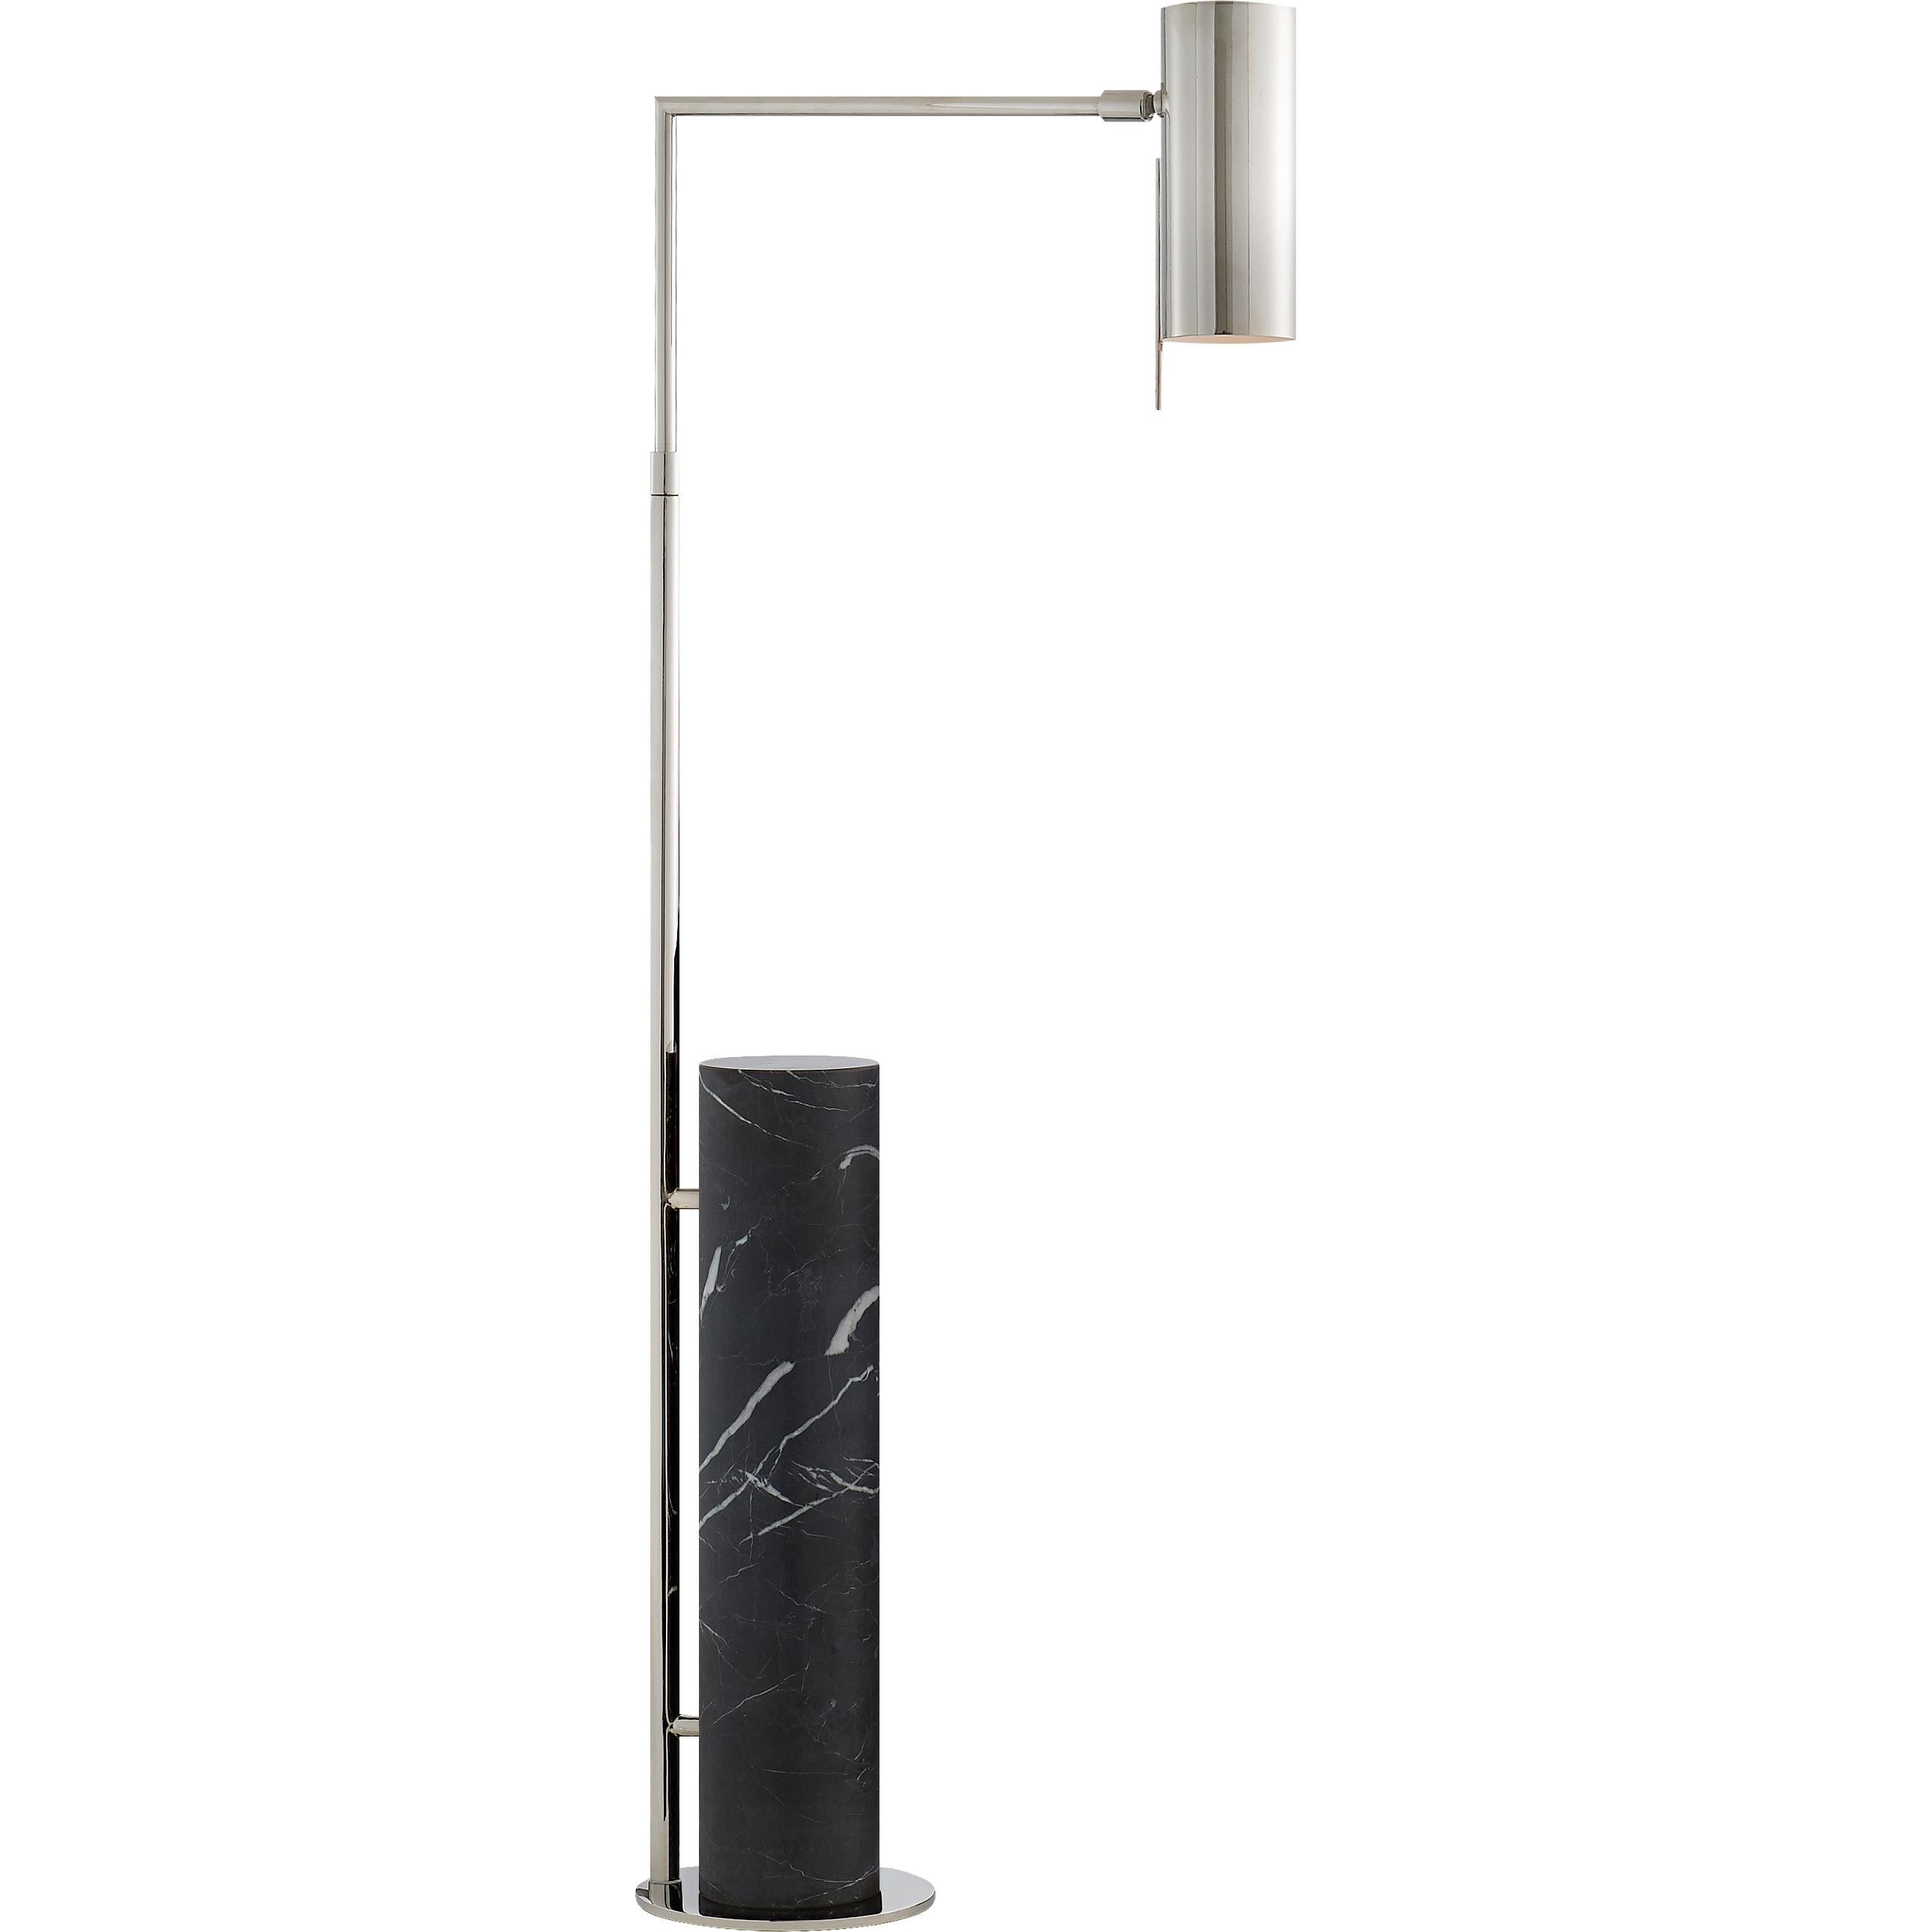 This Minimalist pharmacy floor lamp in antique burnished brass or polished nickel that is as functional as it is beautiful. The tubular shade on the adjustable arm hovers above a base of cylindrical marble. The lamp rotates 40 degrees; 20 degrees